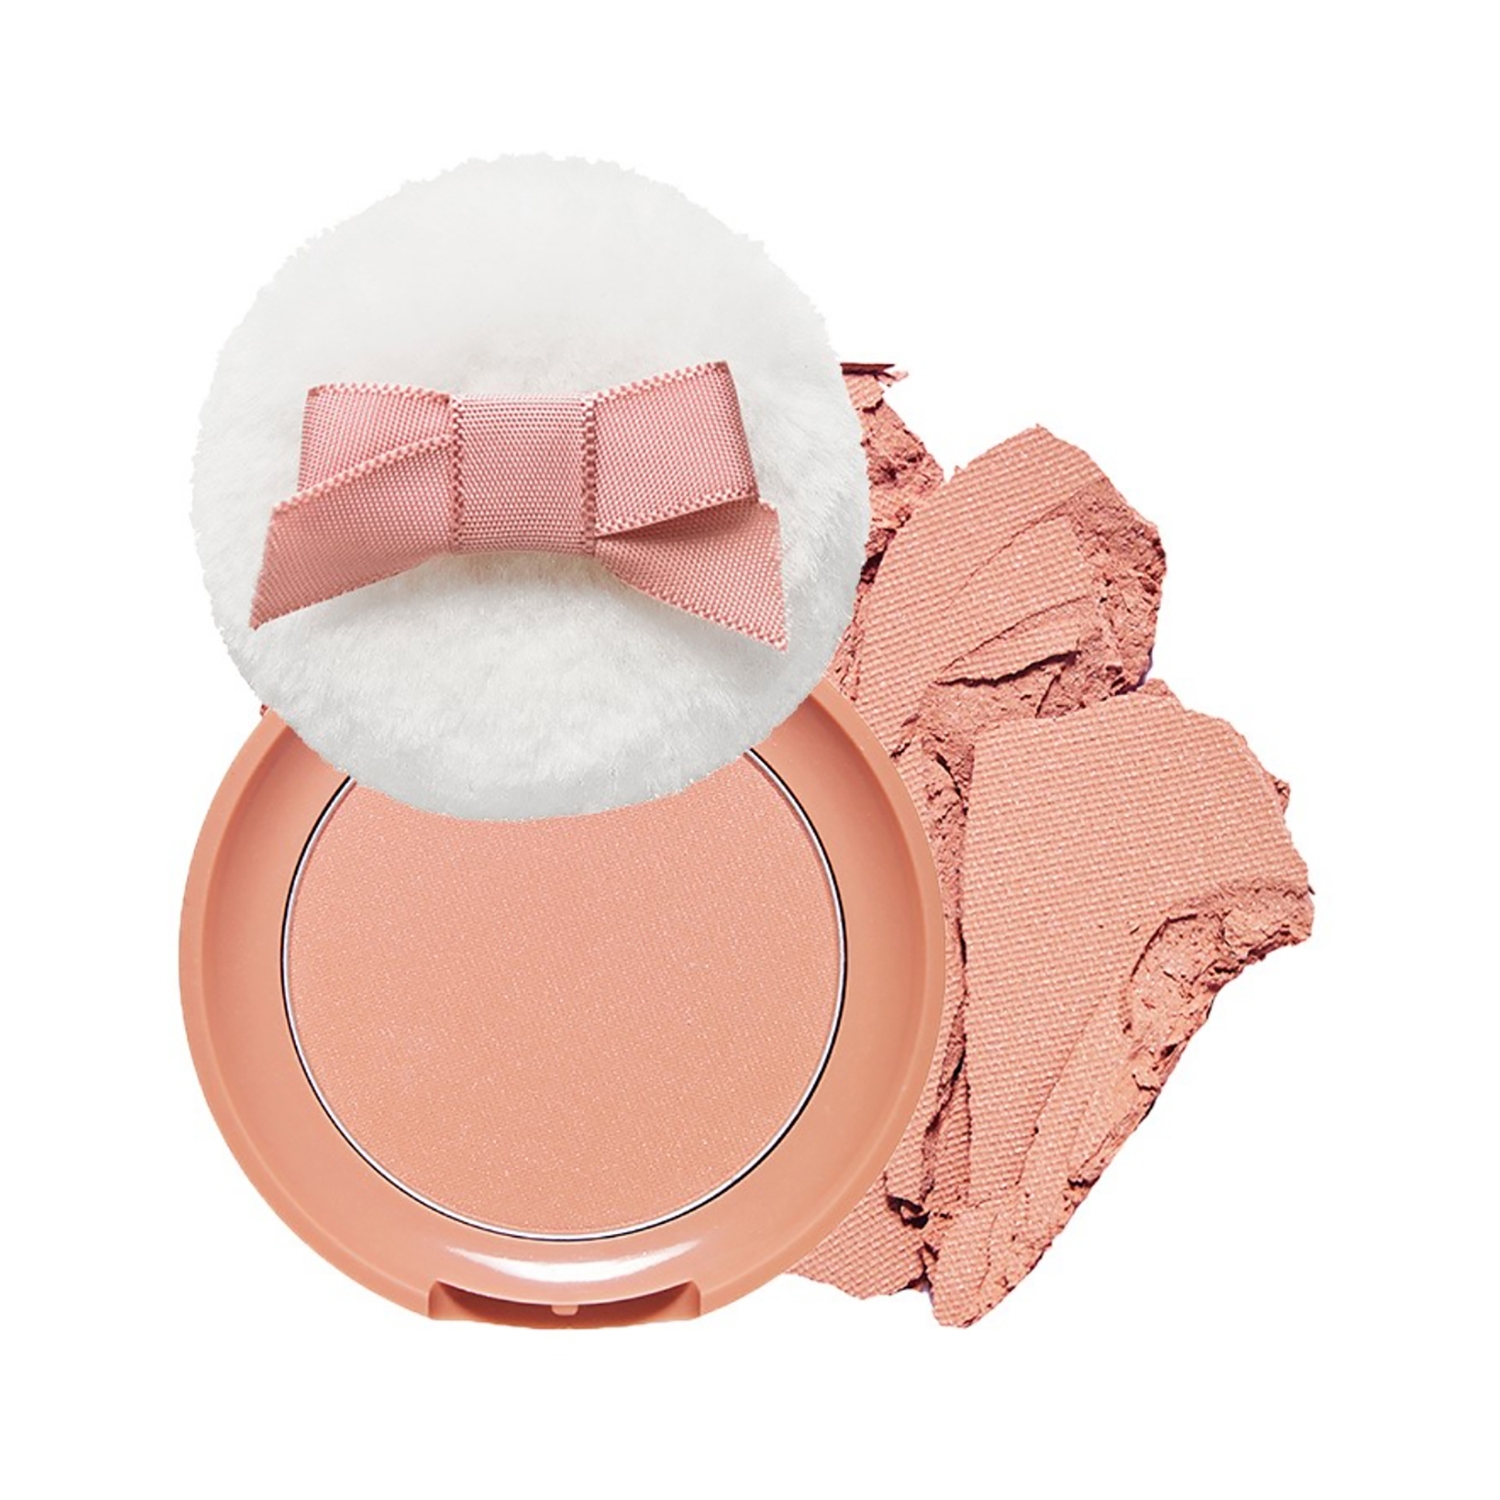 ETUDE HOUSE | ETUDE HOUSE Lovely Cookie Blusher - BE101 Ginger Honey Cookie (4g)